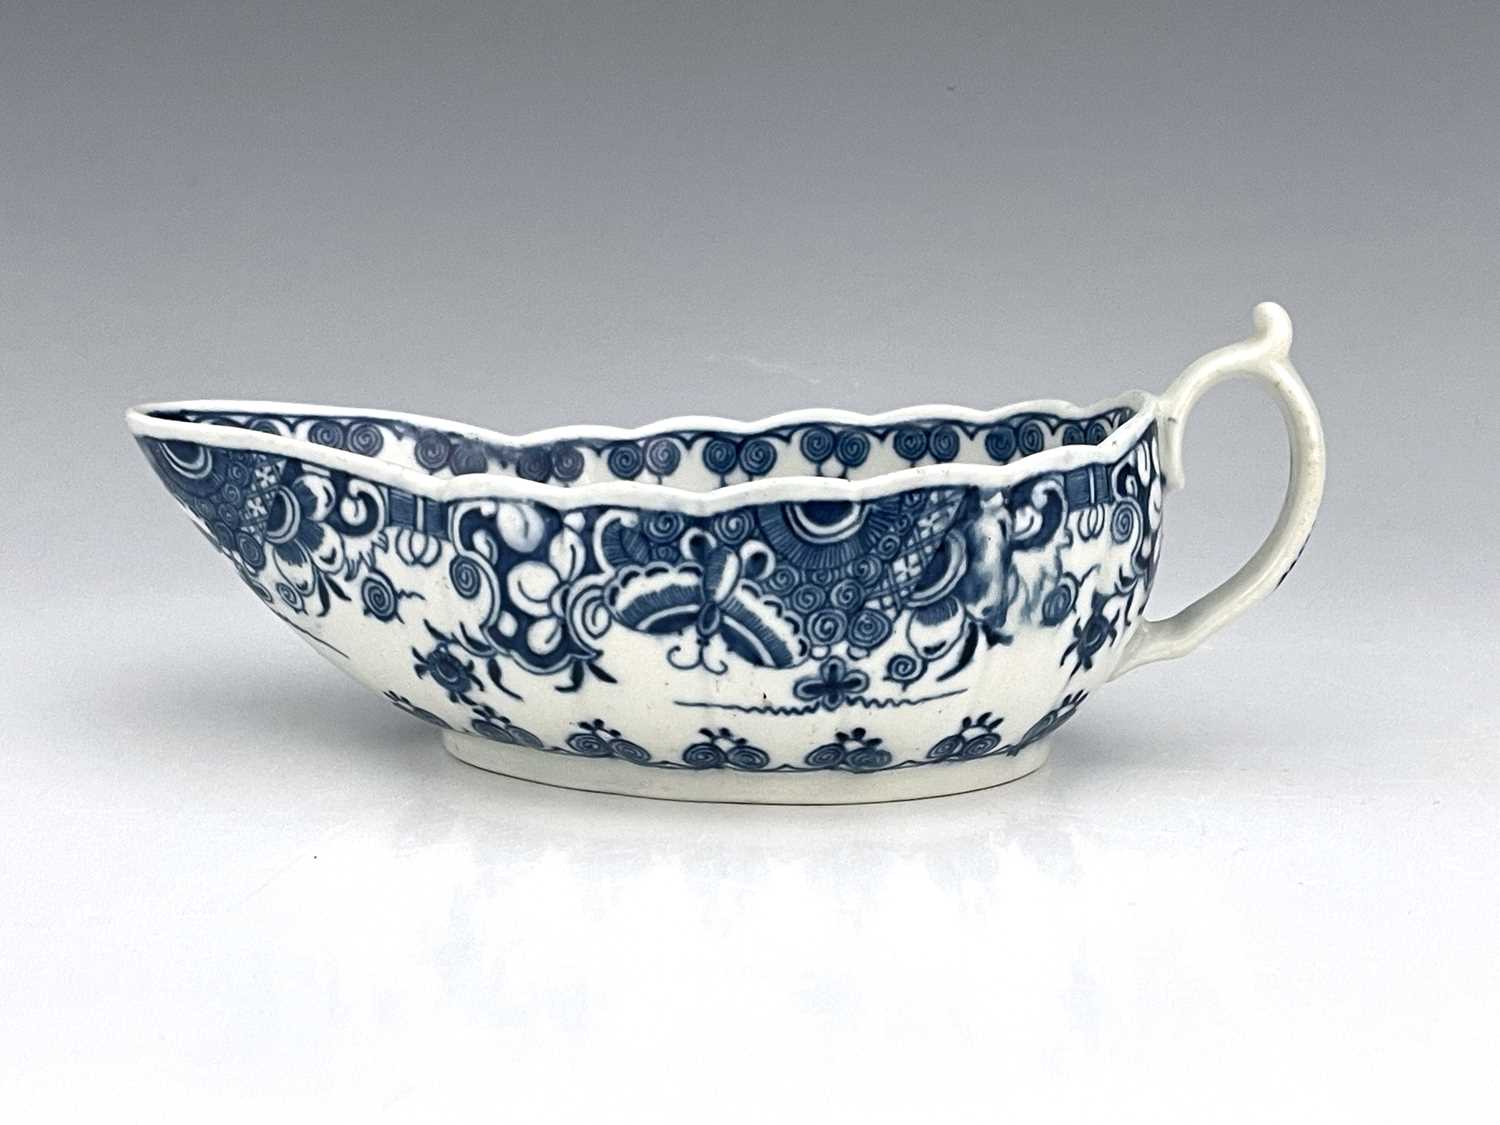 A Worcester blue and white sauce boat, circa 1765-70, reeded form, painted with the Donut pattern to